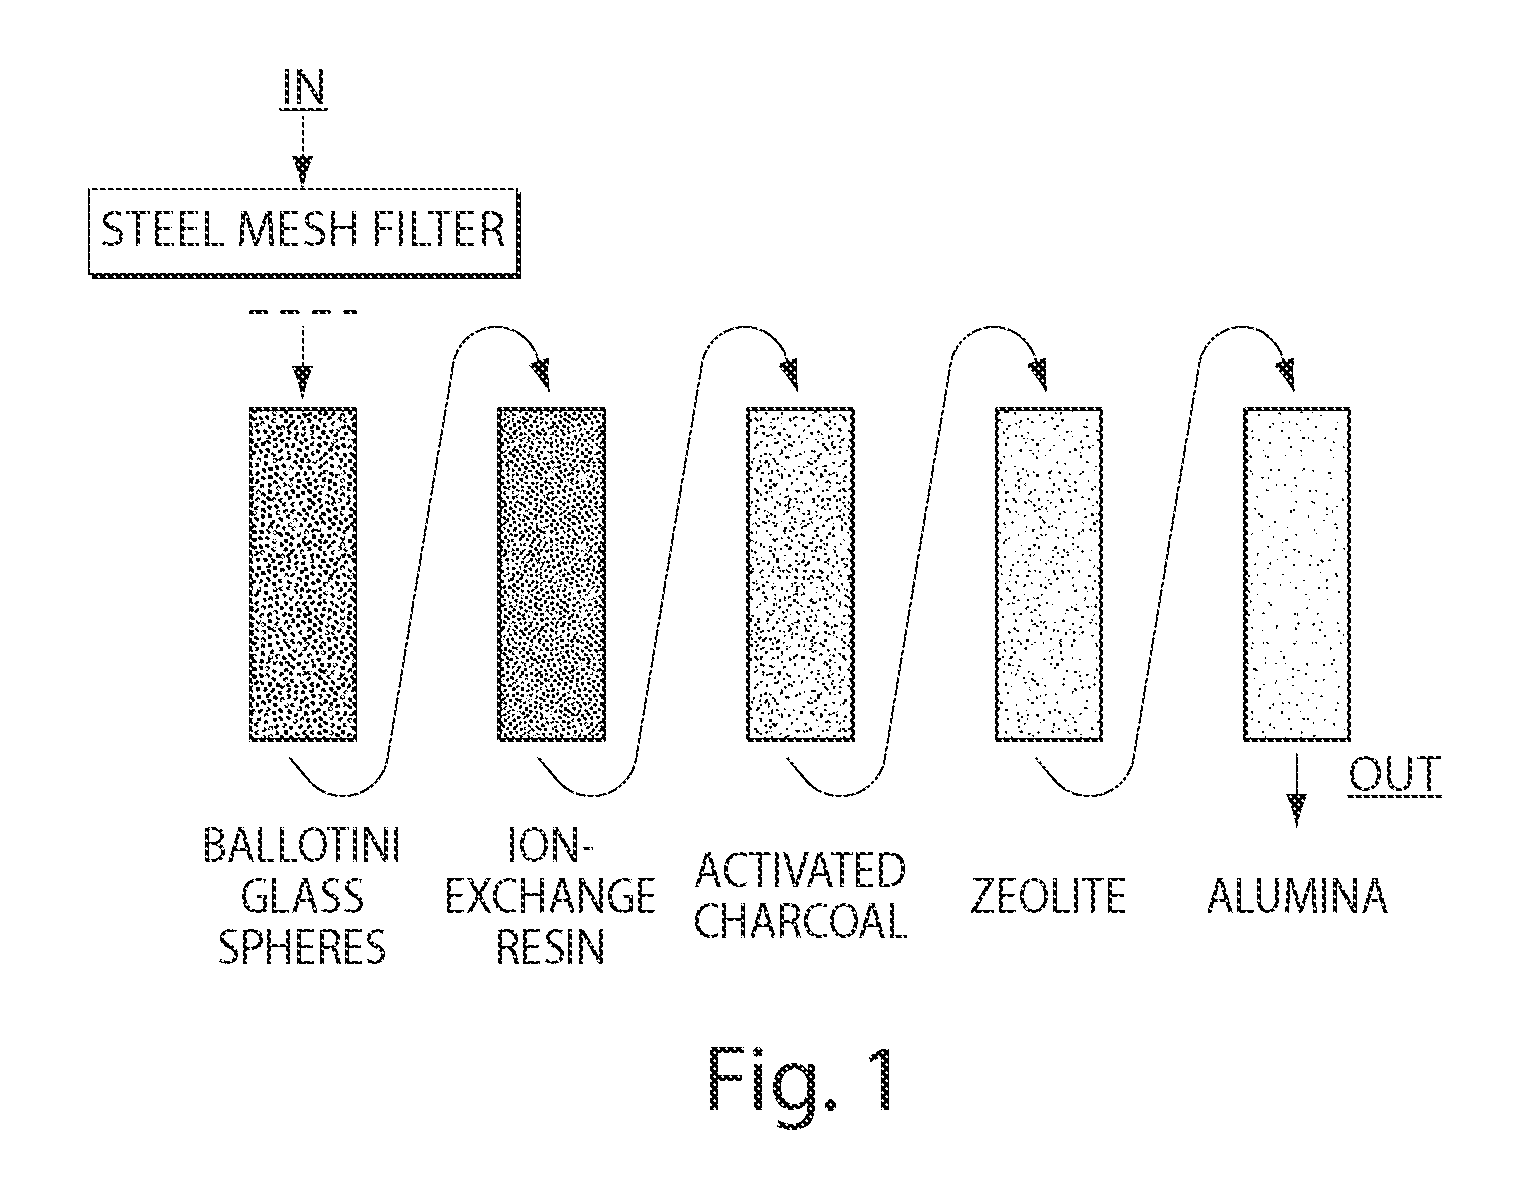 Method and apparatus for removing contaminants from water